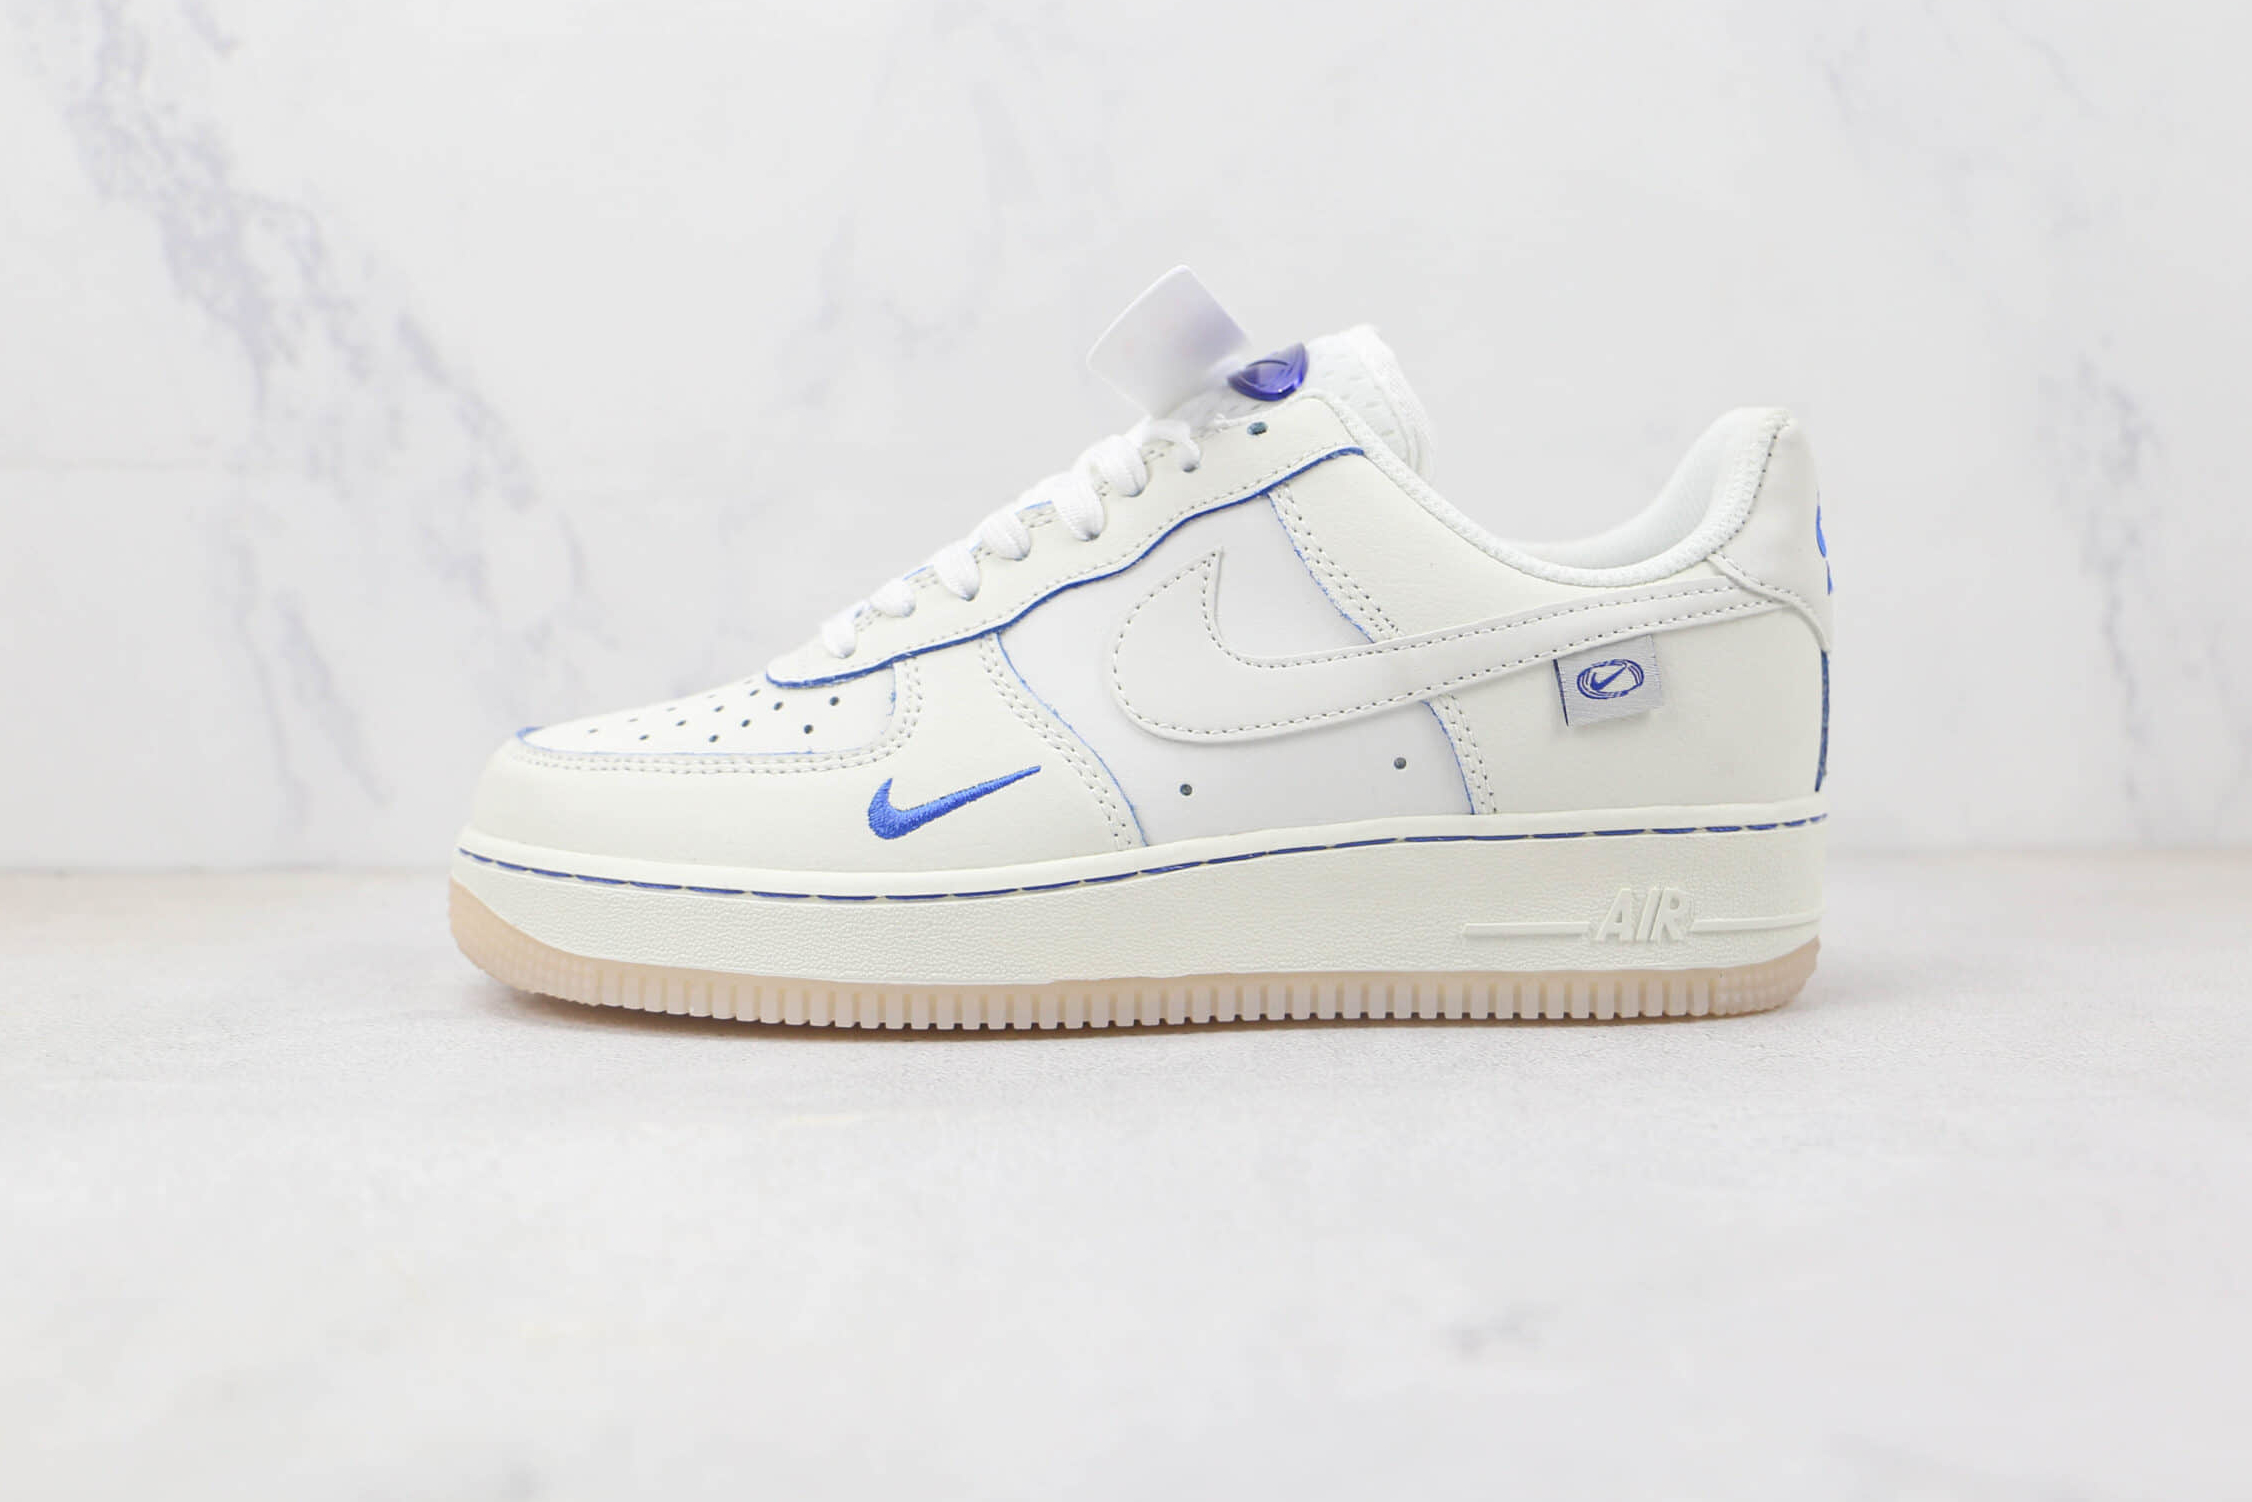 Nike Air Force 1 07 Low White Navy Blue DX1156-001 - Classic Style and Comfort